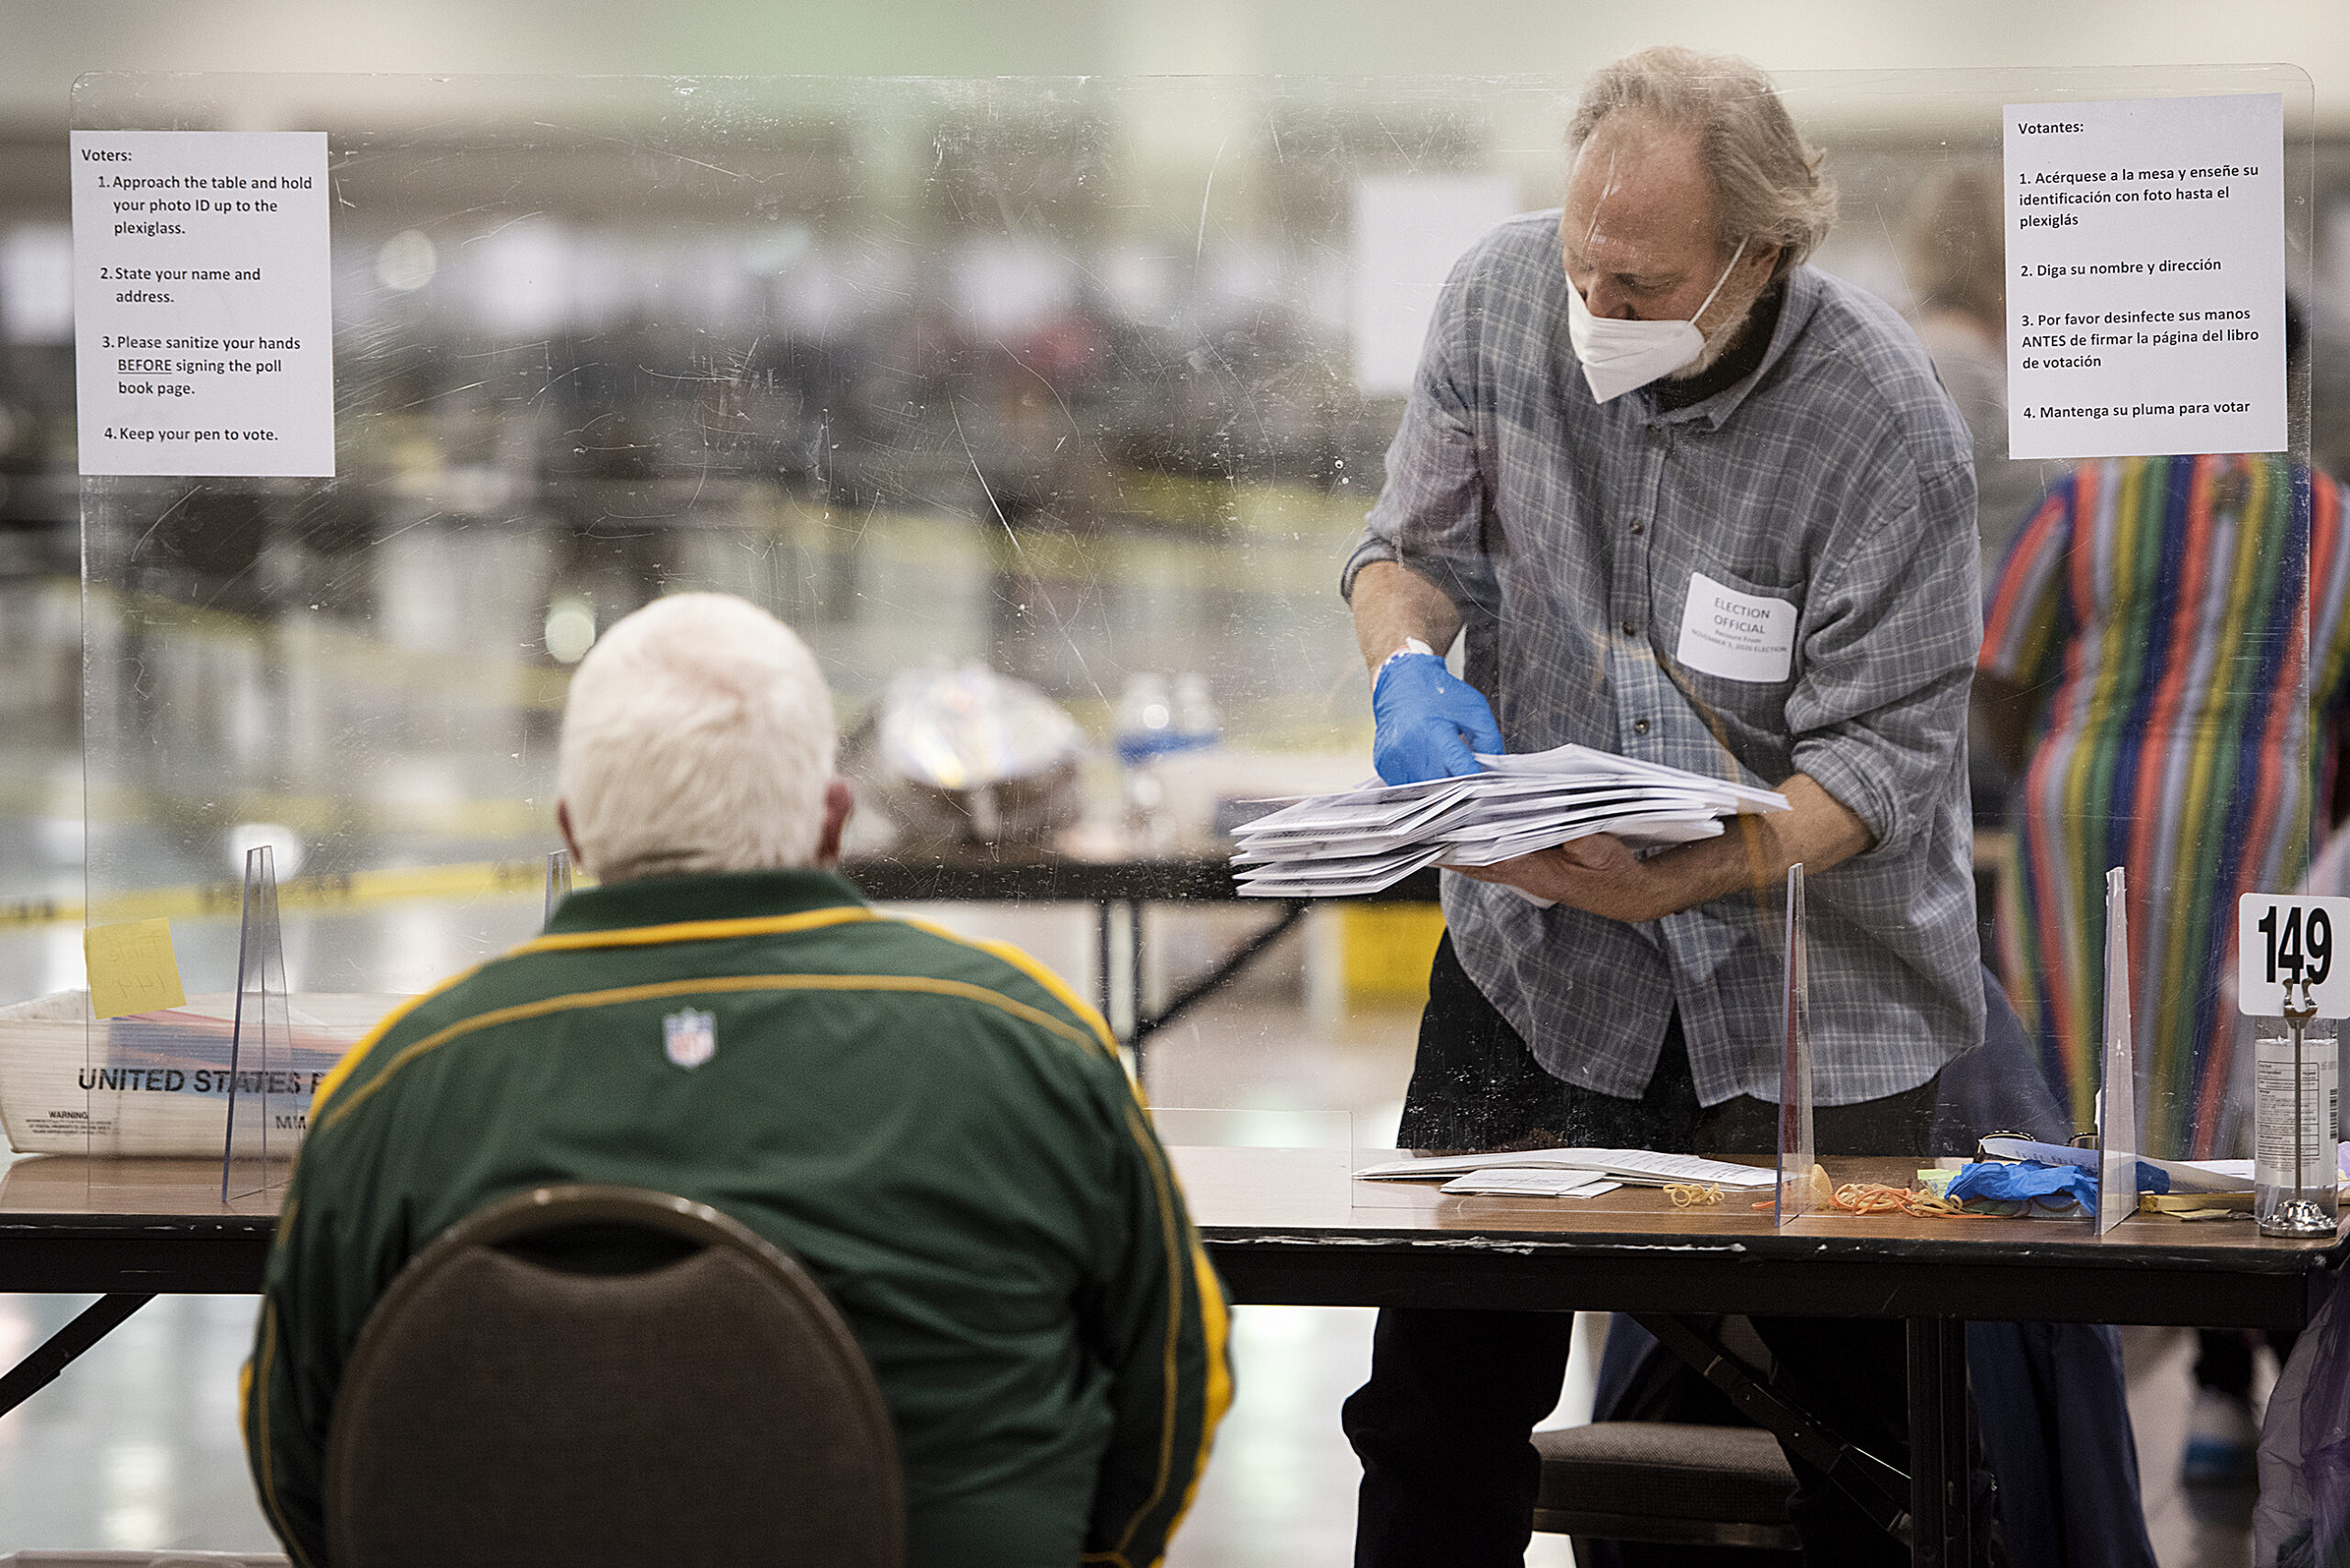 Aces high: Wisconsin municipalities break tied election results with games of chance